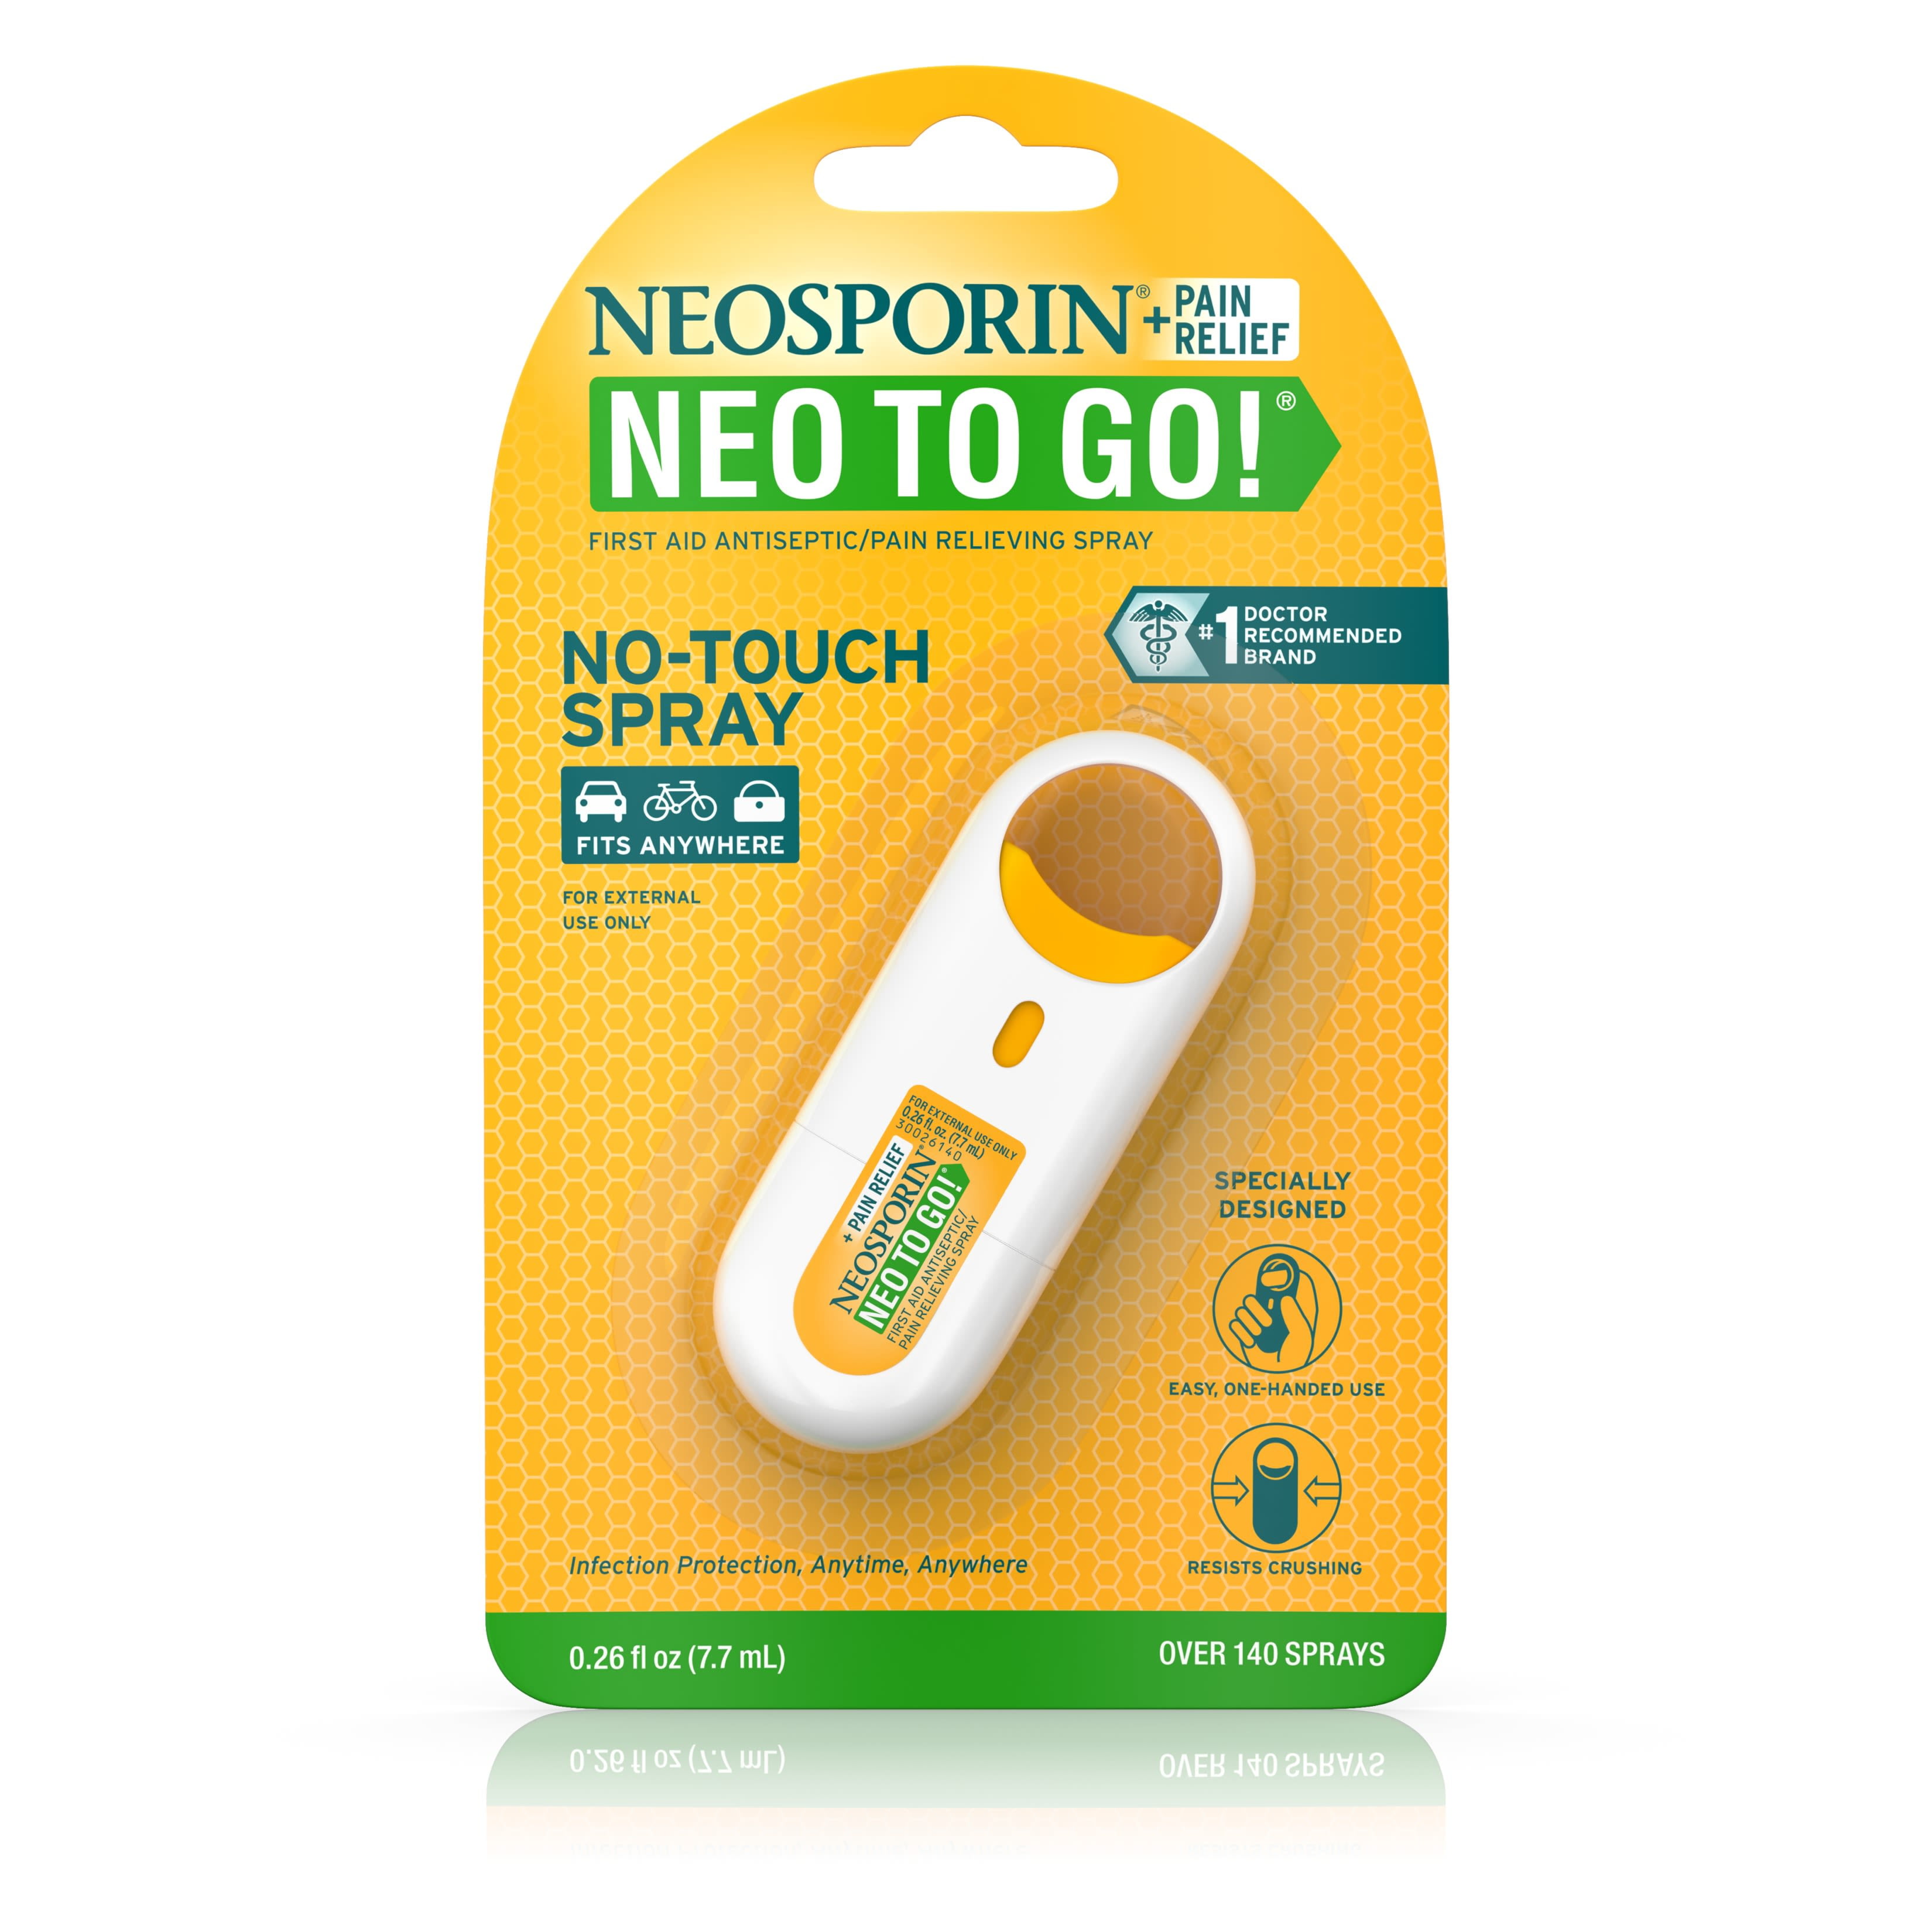 Neosporin Pain Relief Neo To Go First Aid Antiseptic Pain Relieving Oz 